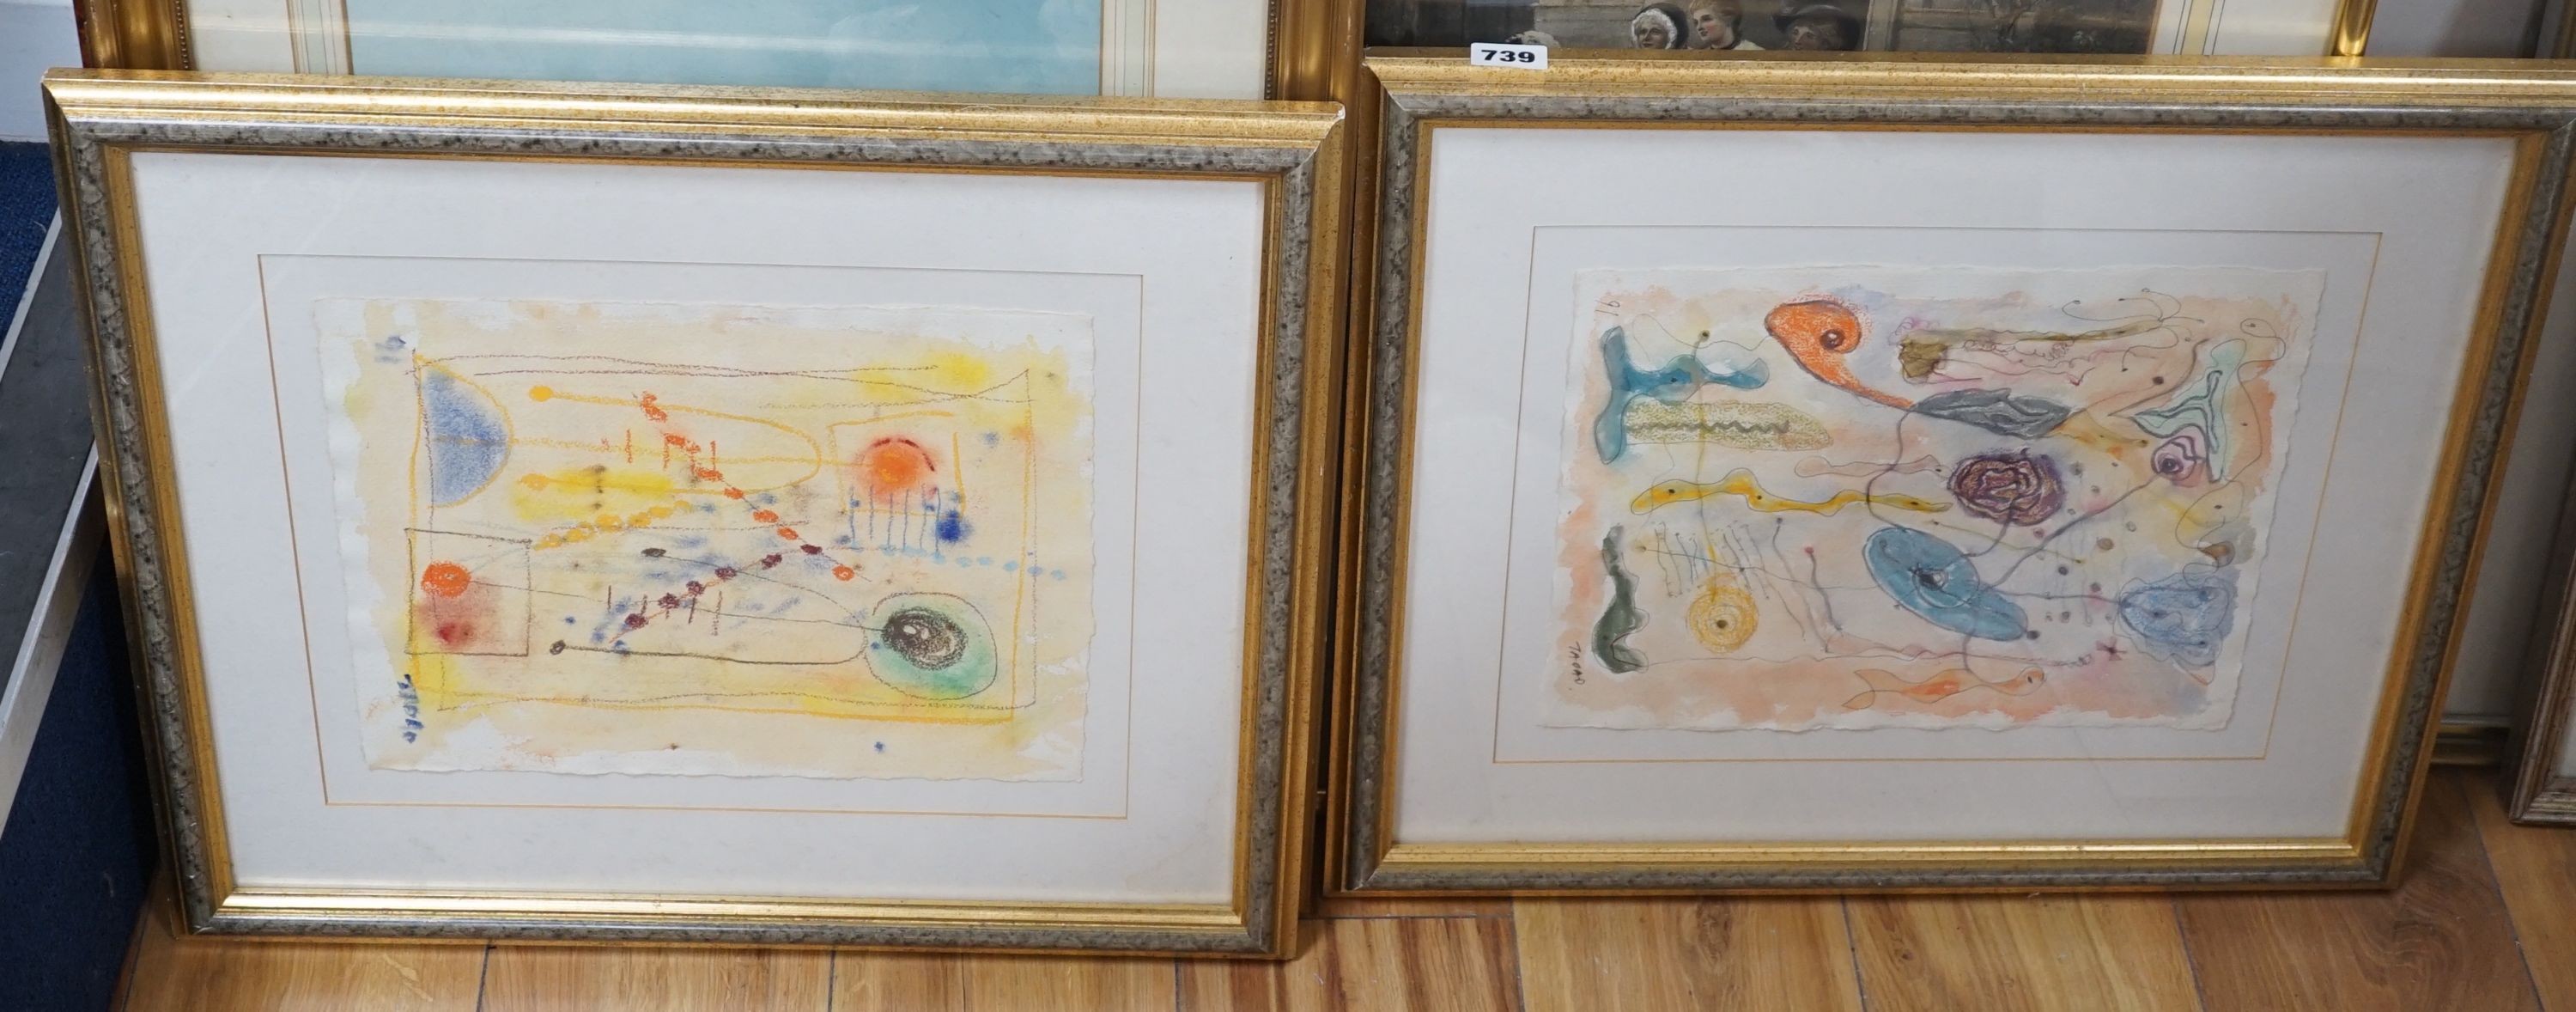 Tadad (?), a pair of abstract watercolours, signed and dated ‘91, Image 32 cm X 24.5 cm